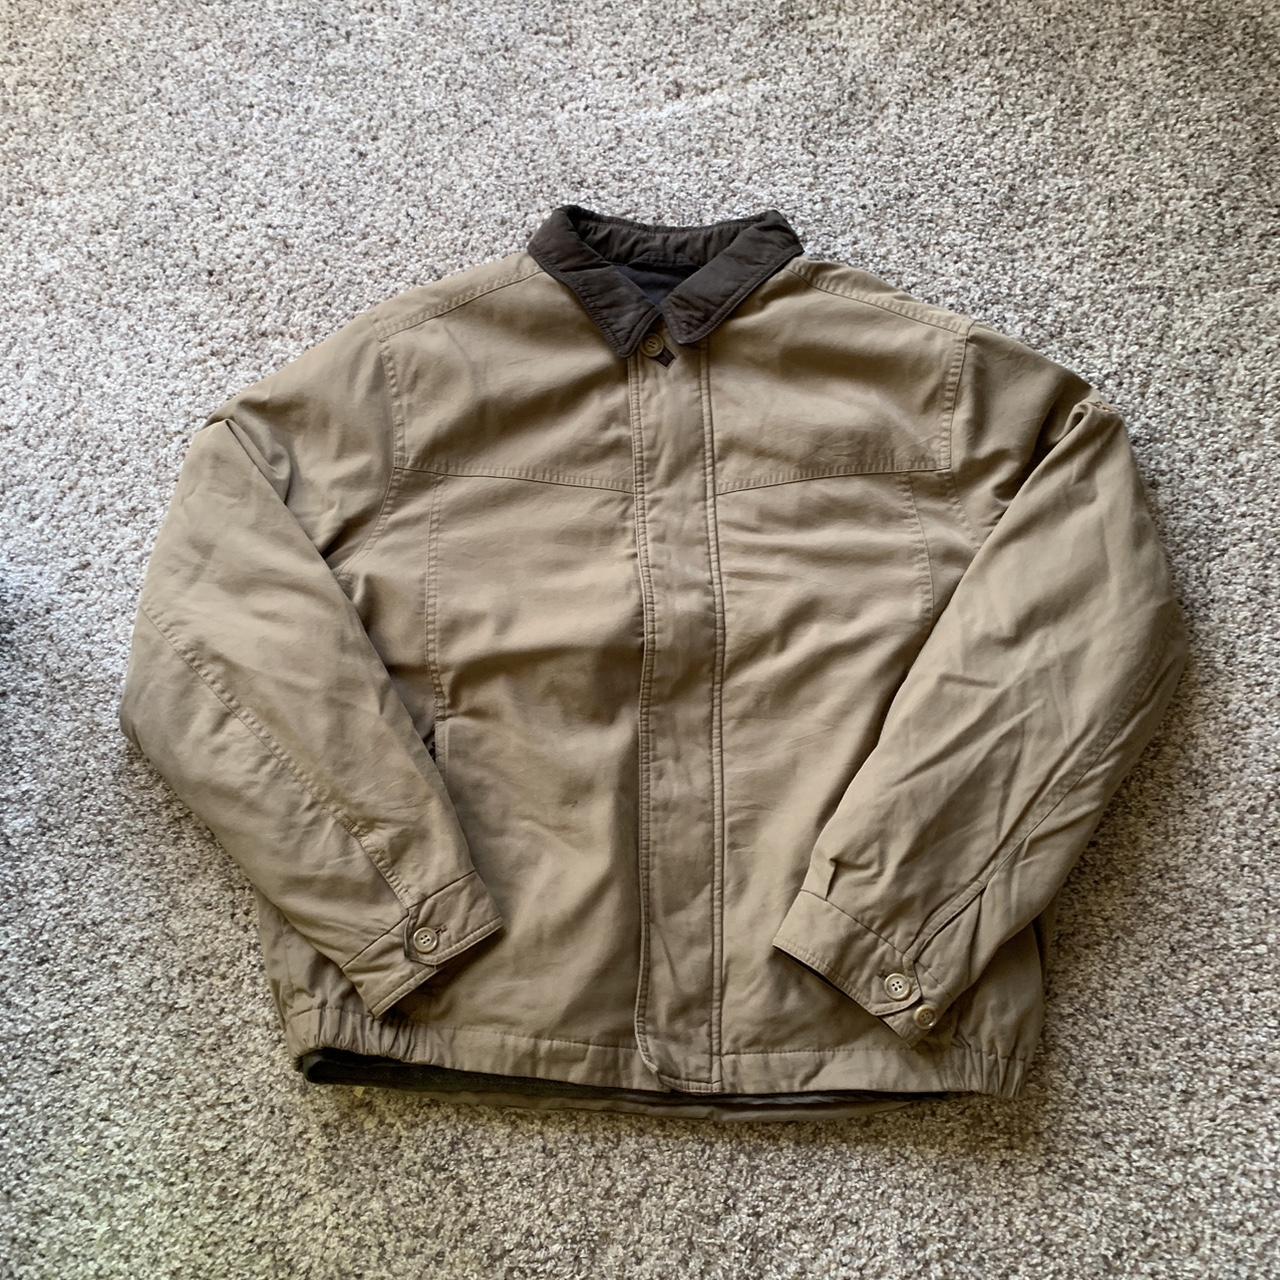 Tan dockers jacket. Good condition flaws shown in... - Depop